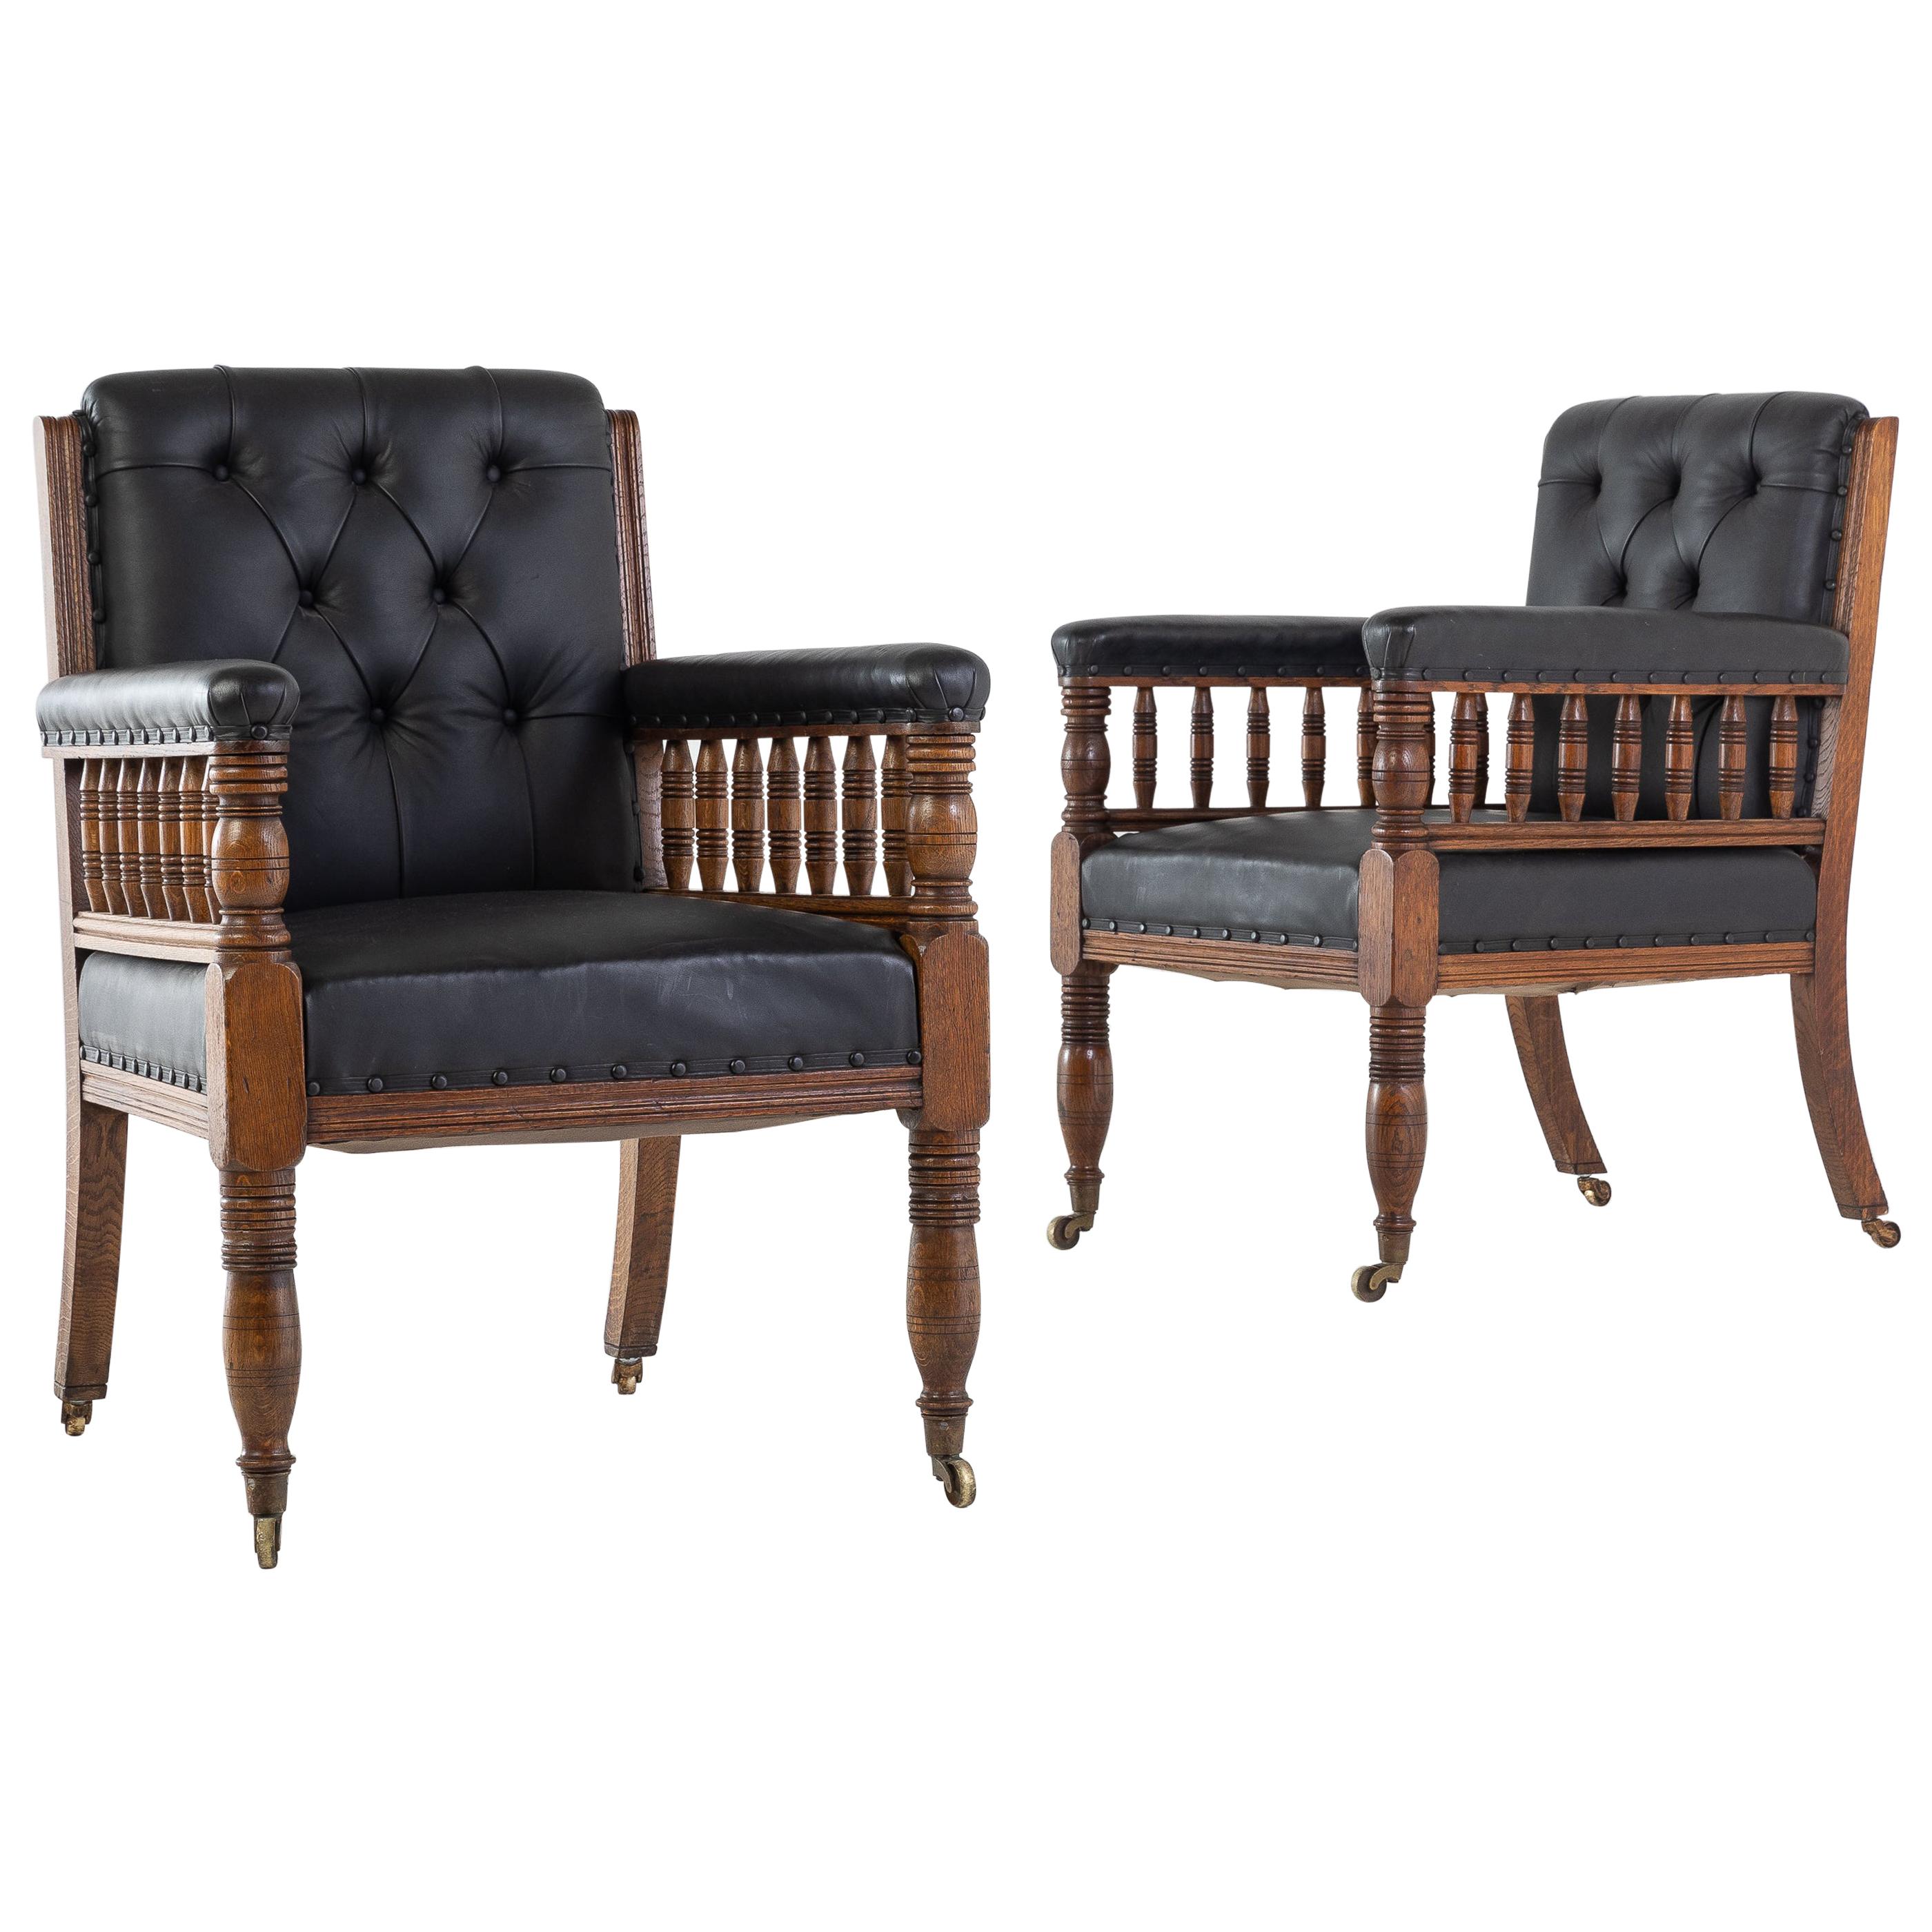 Pair of 19th Century Large Scale Oak Armchairs